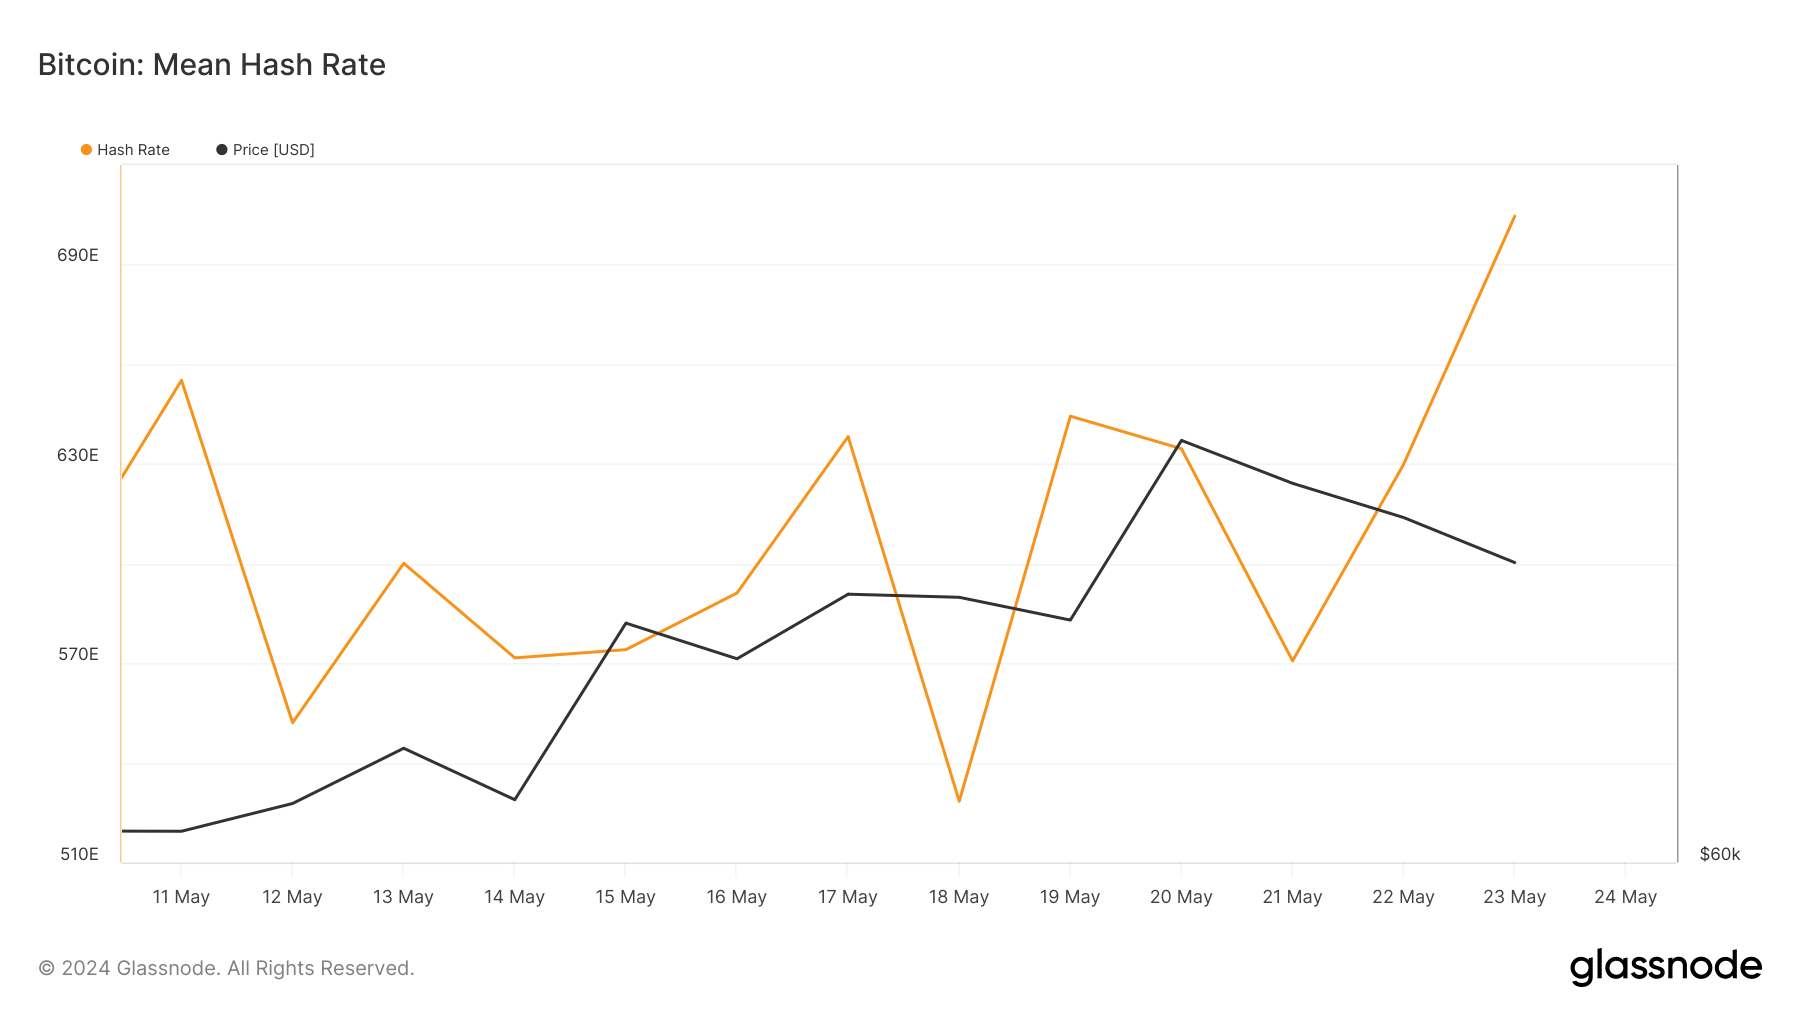 Bitcoin hash rate spikes